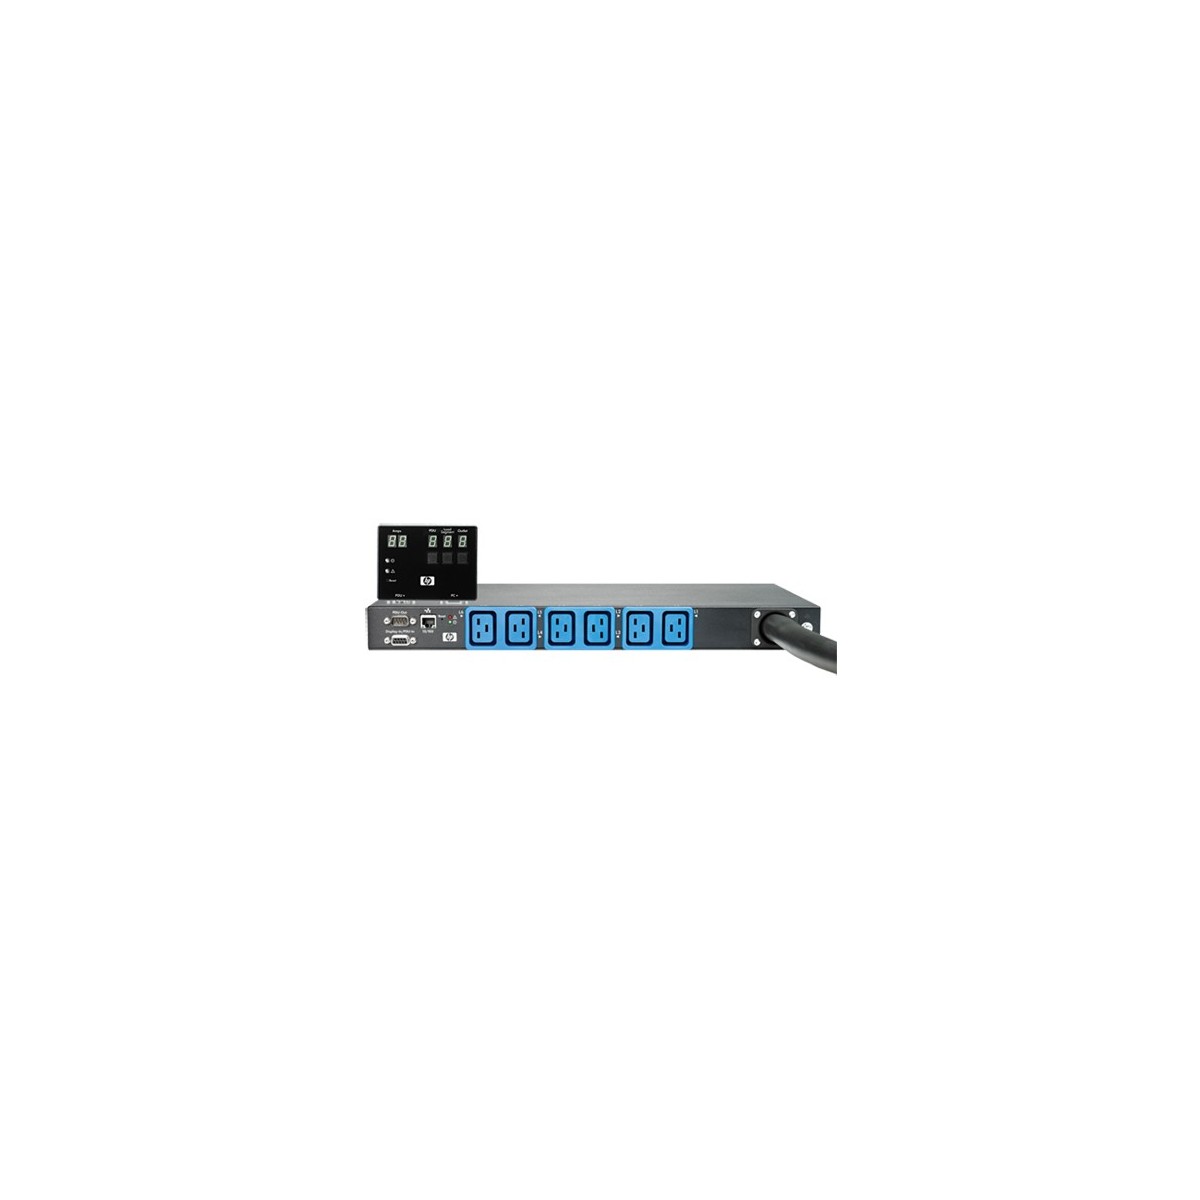 HPE 32A 3 Phase Intl Core Only Intelligent Modular PDU - Modular - Black - Blue - 6 AC outlet(s) - C19 coupler - (Single) IEC603